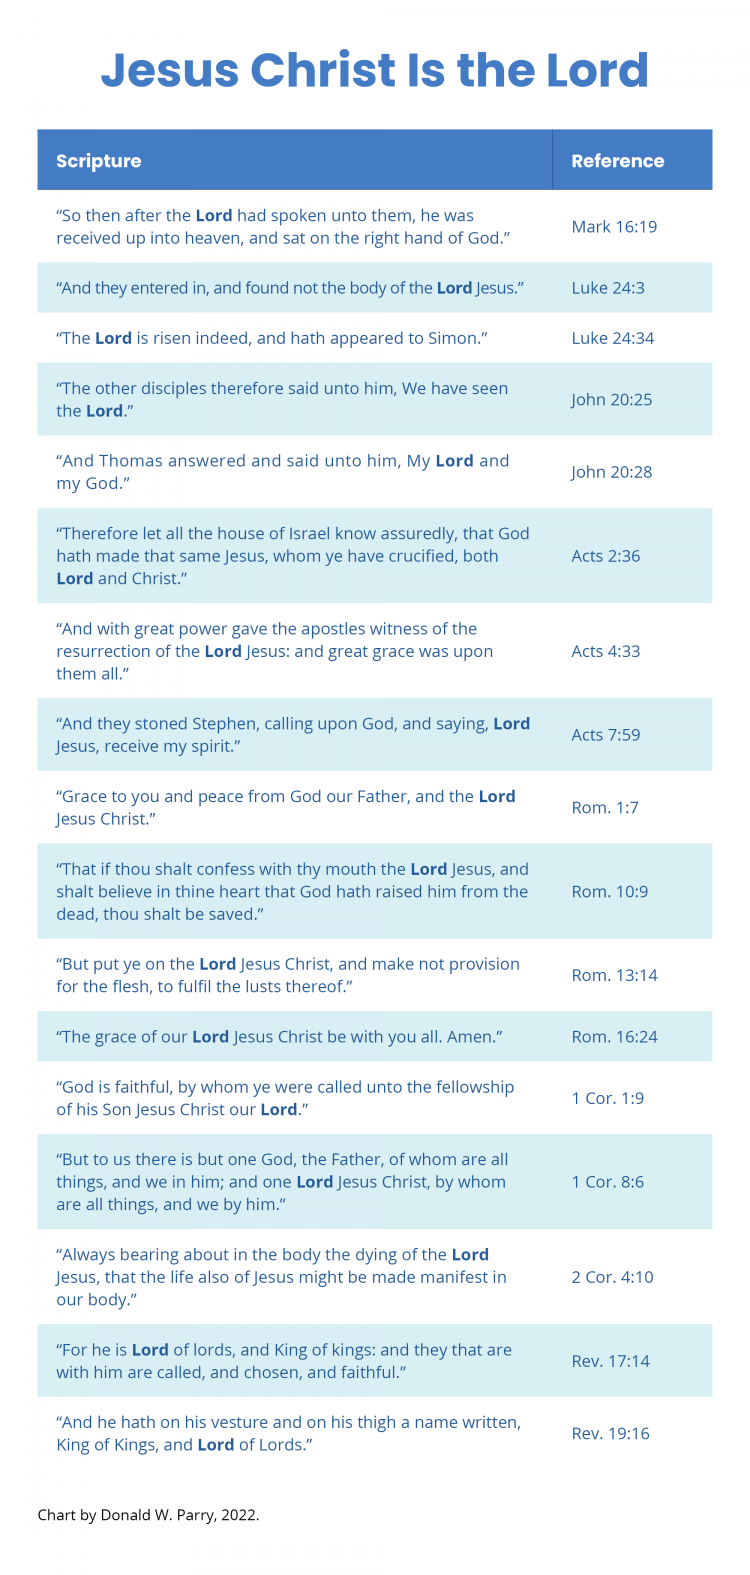 Chart by Donald W. Parry. Jesus Christ Is the Lord.